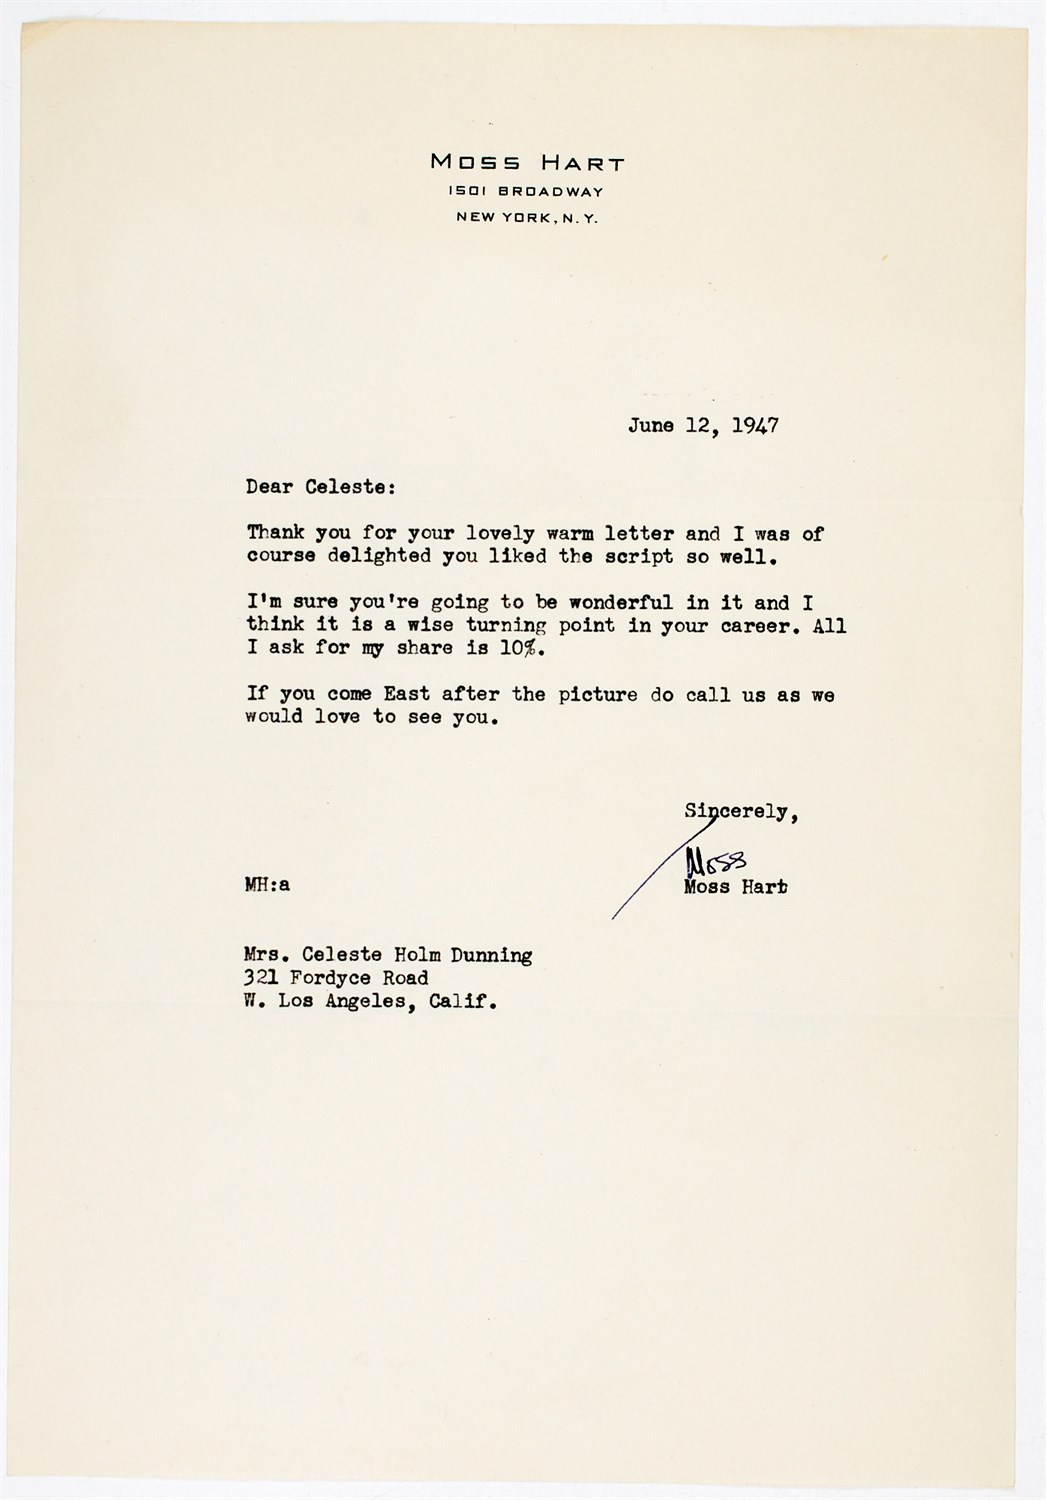 Lot 5095 - Two rare letters from Moss Hart about an Oscar winner